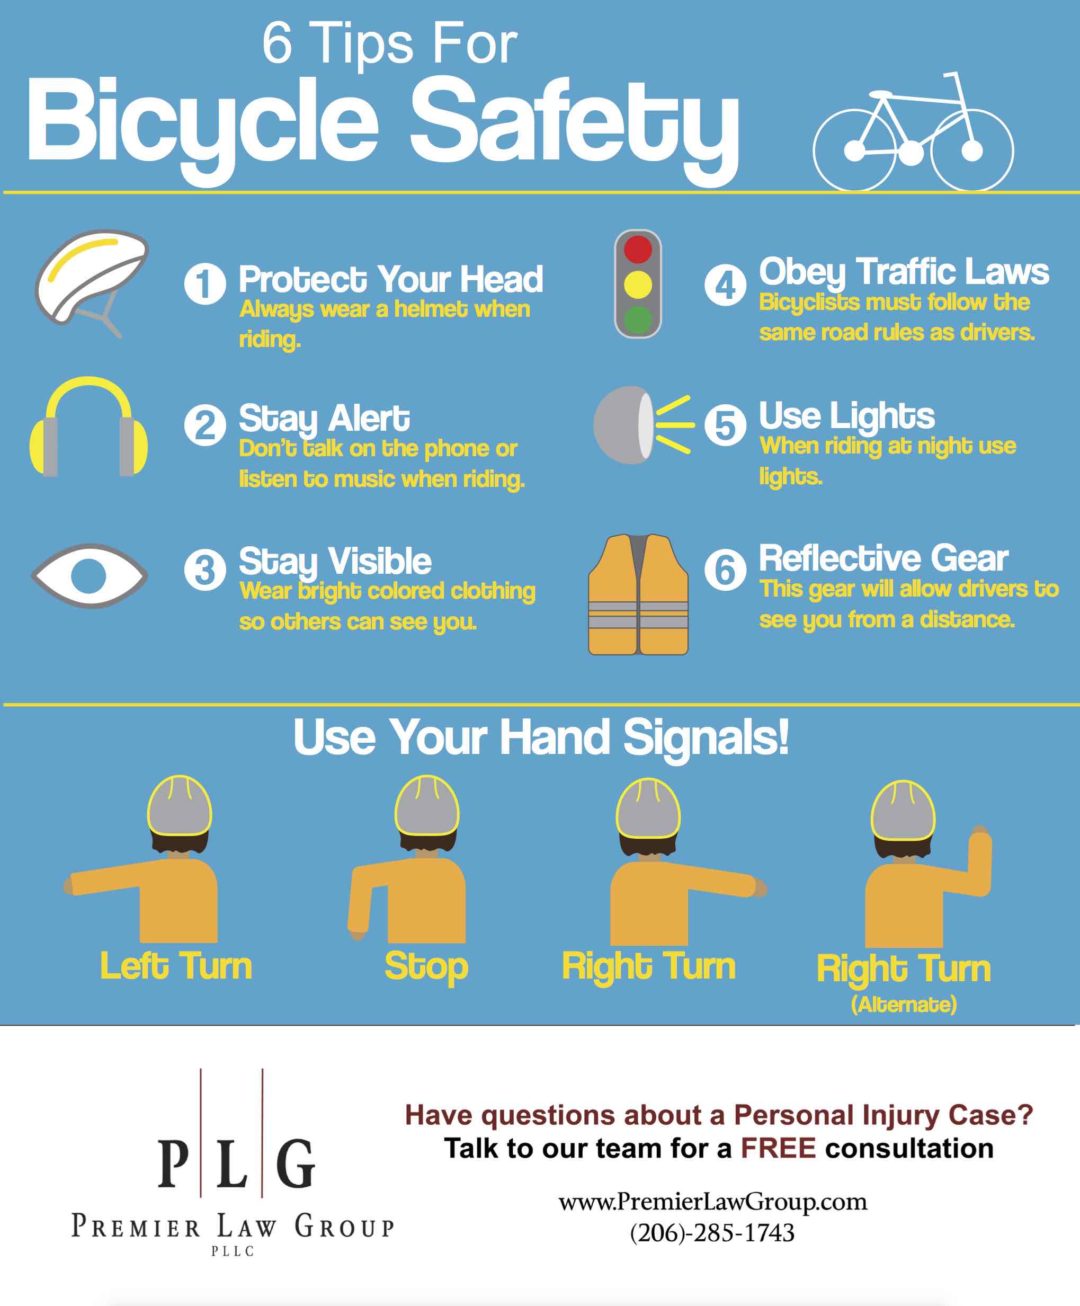 6 Tips For Bicycle Safety - Premier Law Group Tips For Bicycle Safety 1080x1306